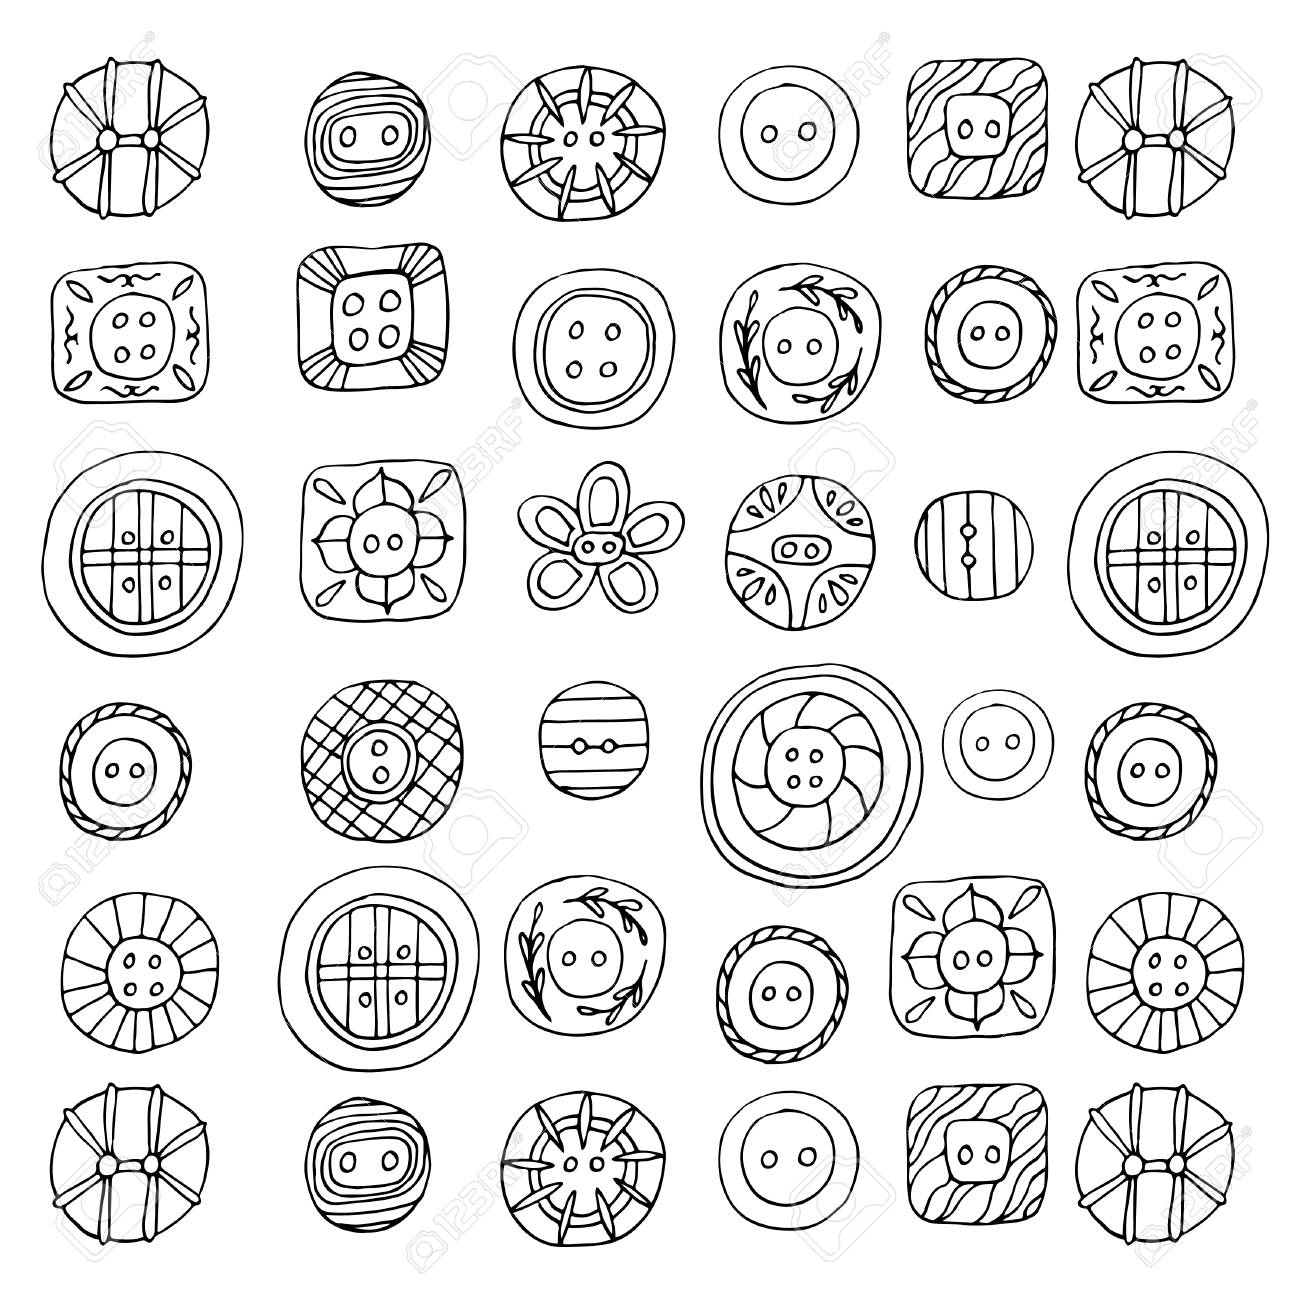 Lovely buttons coloring page royalty free svg cliparts vectors and stock illustration image